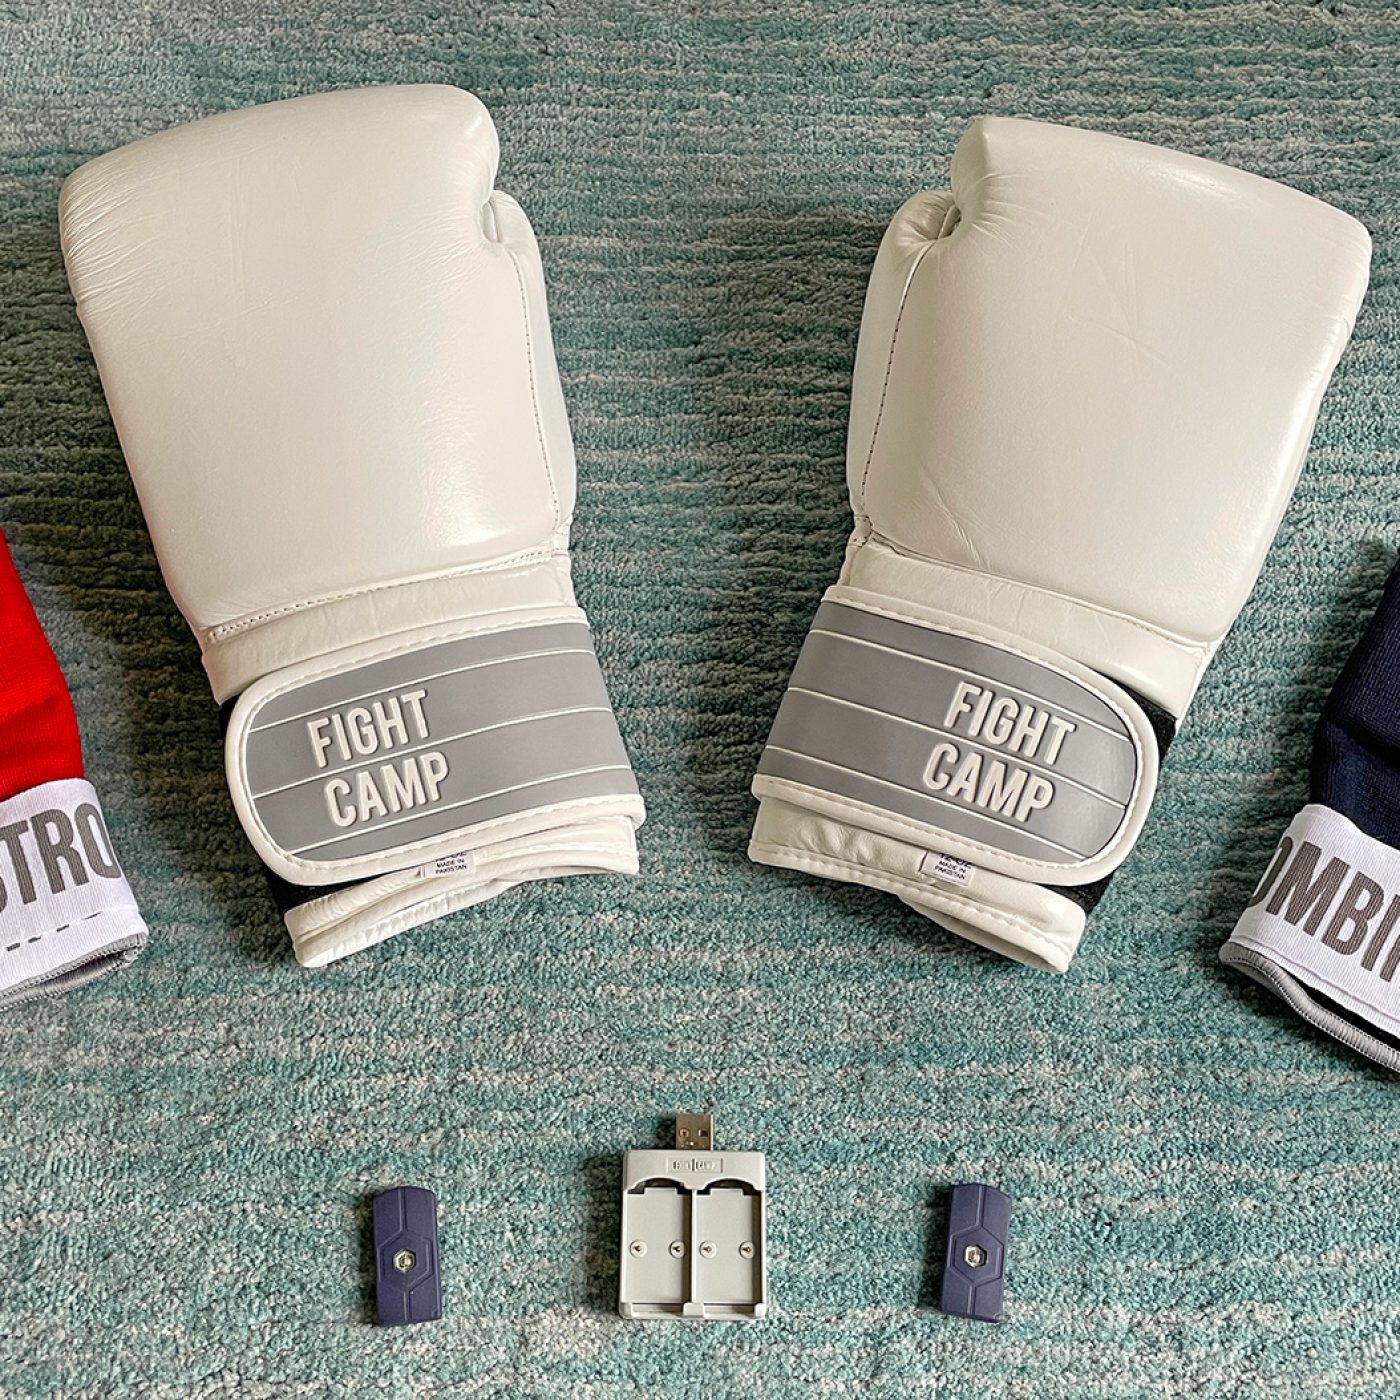 FightCamp Home Boxing Workout Service Test and Review